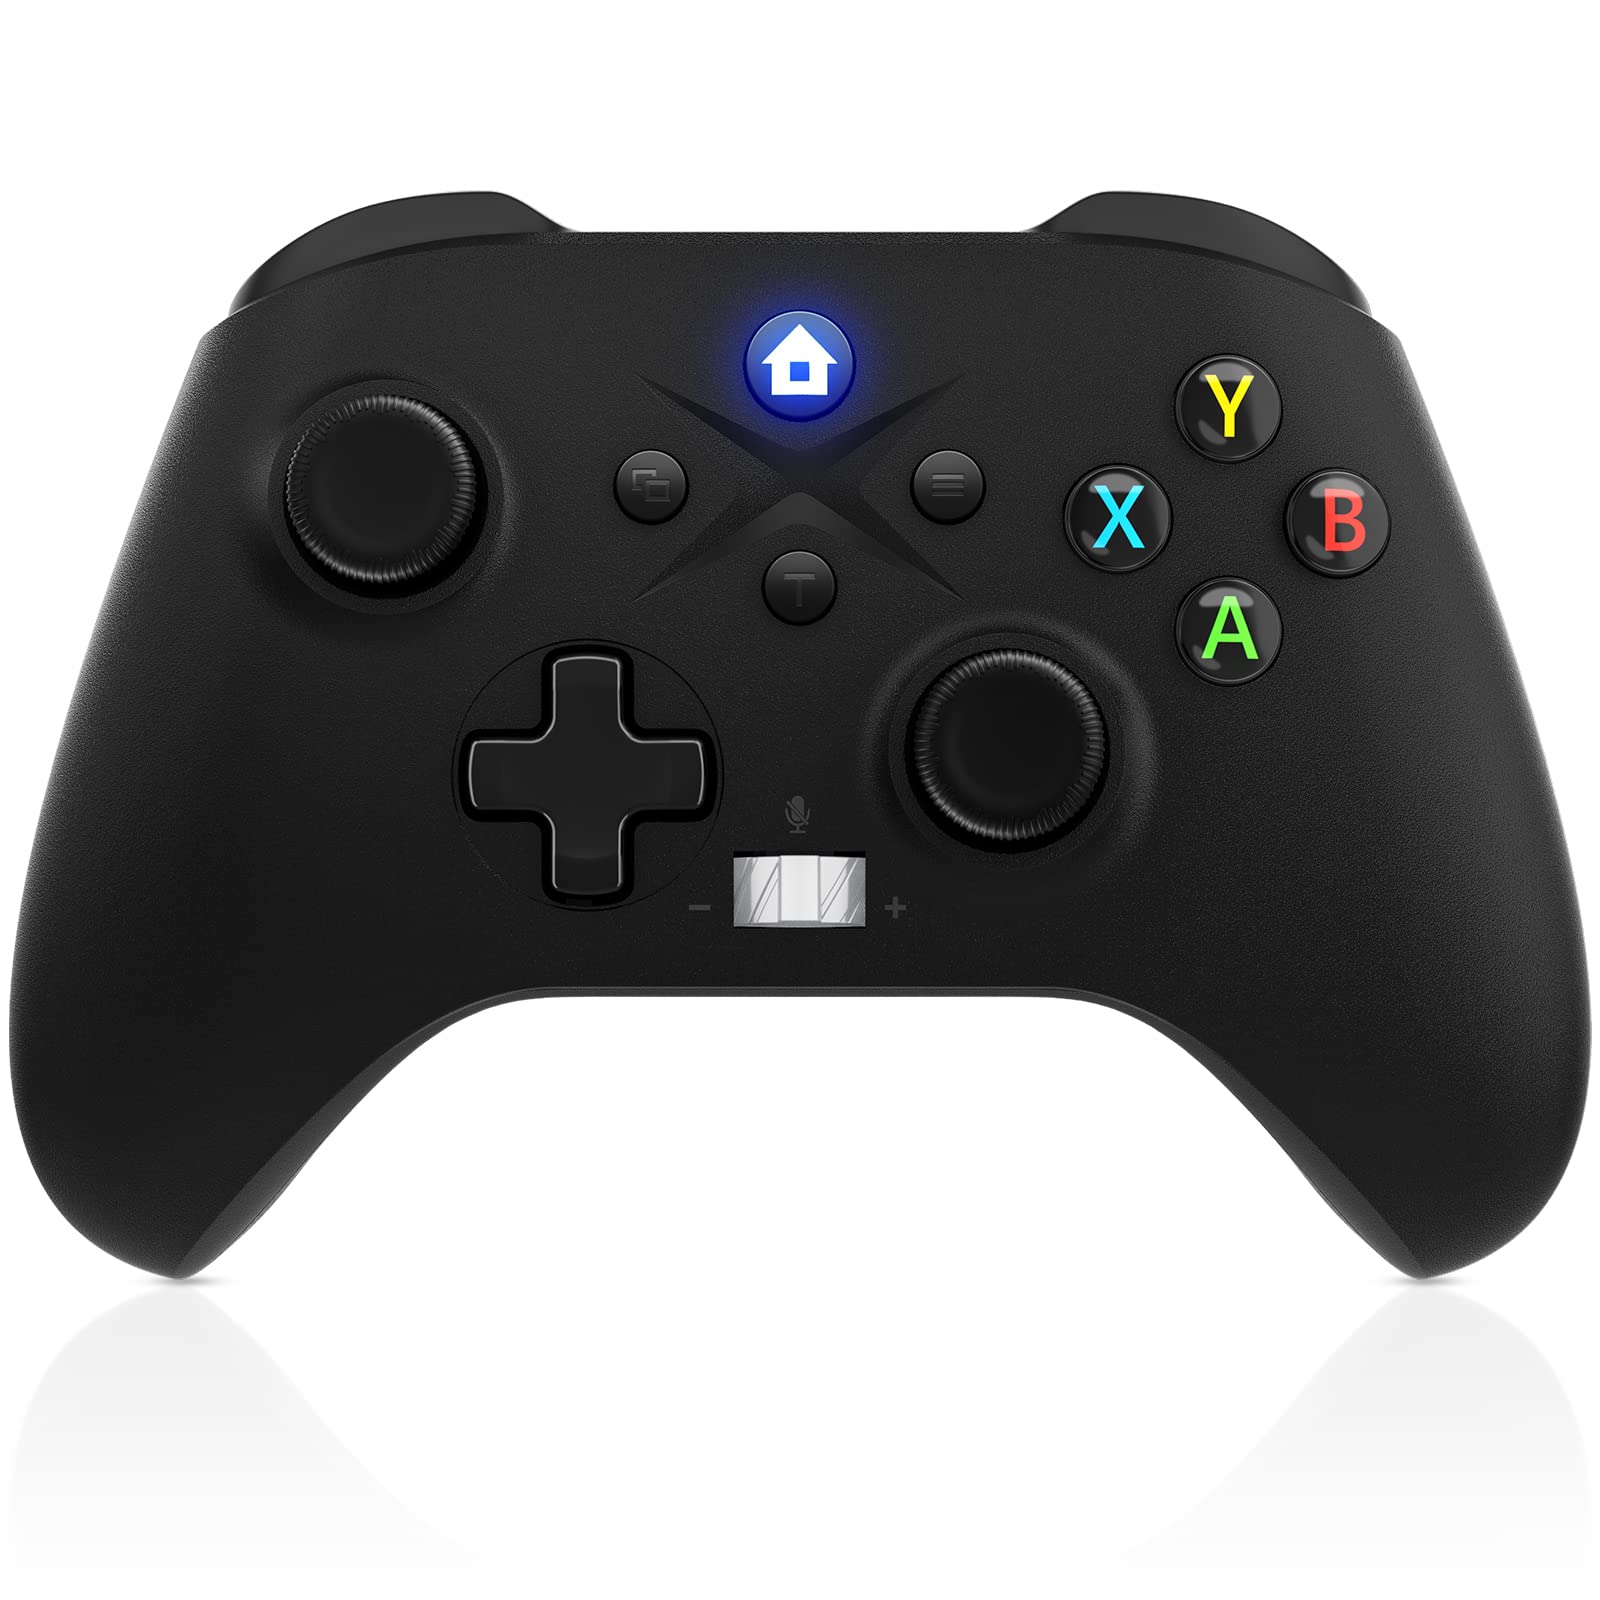 Xbox One controller reconnecting to PC